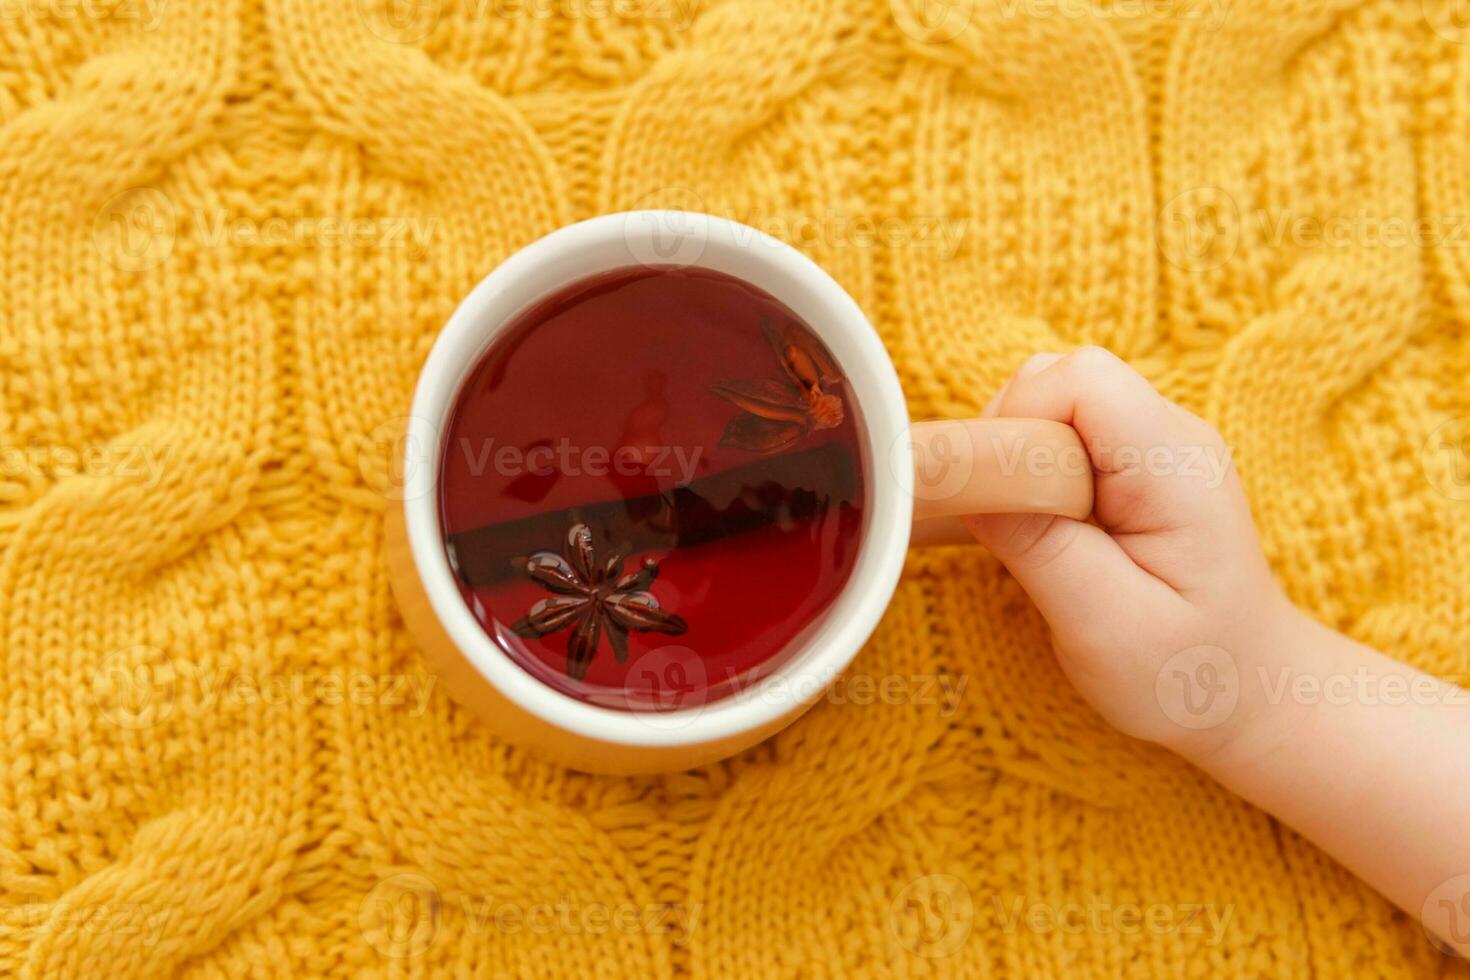 Karkade tea in an orange cup on an orange knitted background. The concept of the autumn season, natural colors. Red fruit tea. photo